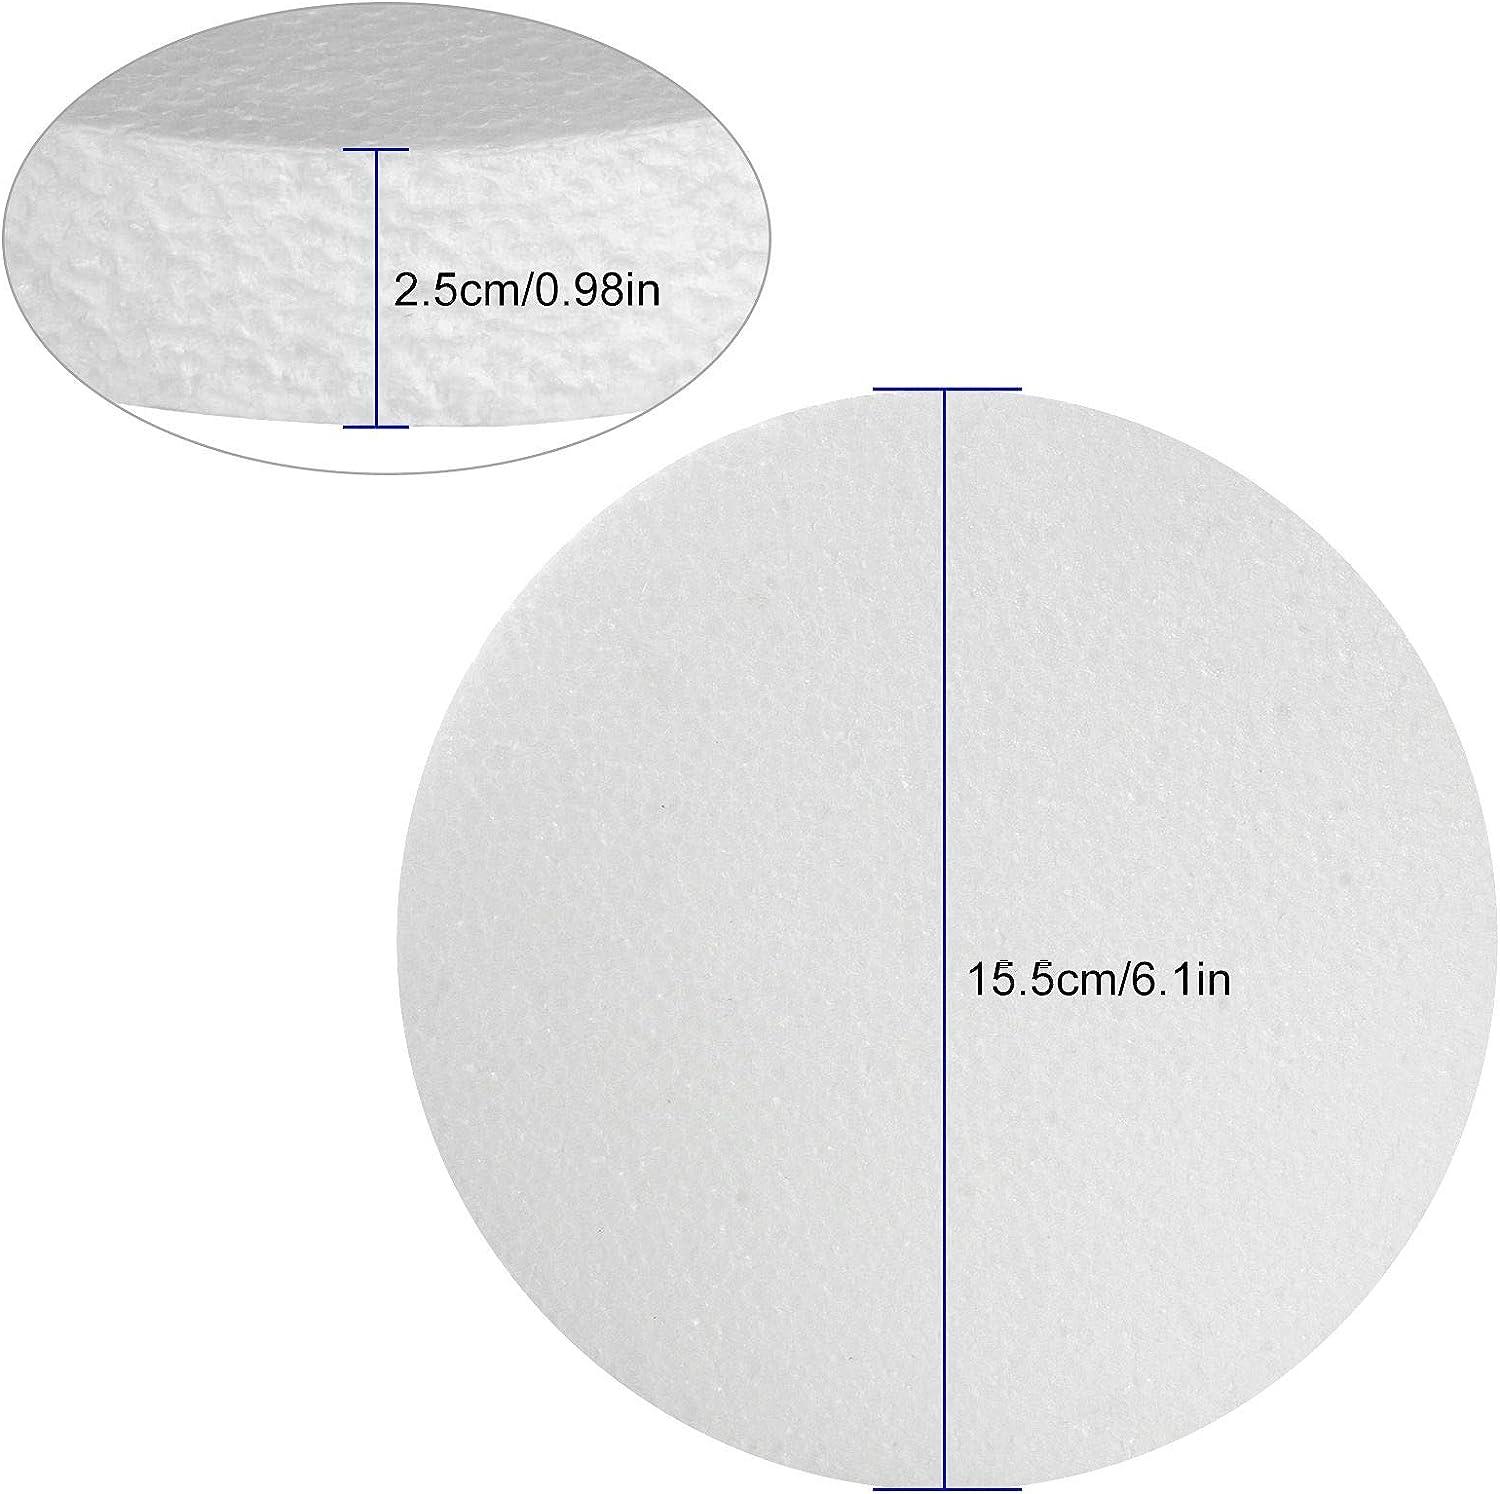 8 inch 10-Pack Foam Circles for Crafts (1 Thick), Polystyrene Round Foam Disc for DIY Projects, Cakes and Decorations, Sculpture, Modeling, Arts